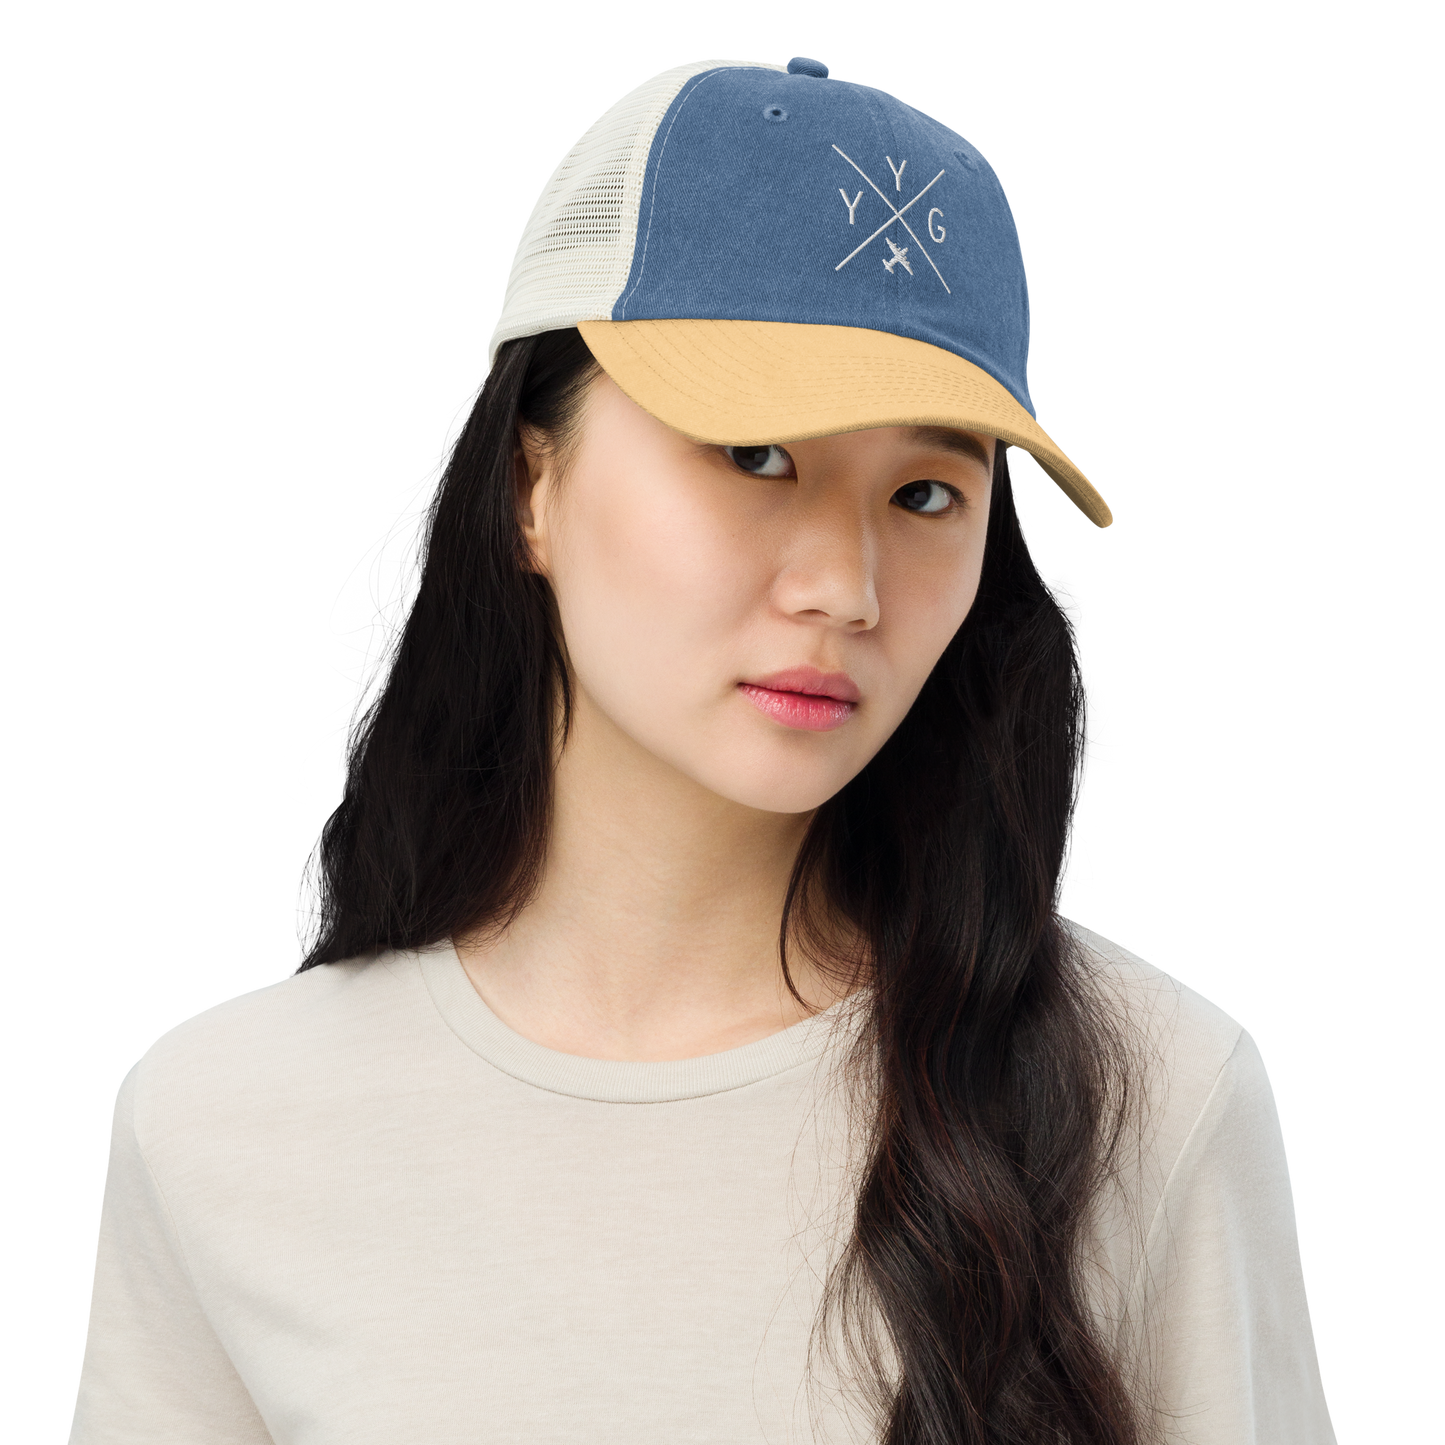 YHM Designs - YYG Charlottetown Pigment-Dyed Trucker Cap - Crossed-X Design with Airport Code and Vintage Propliner - White Embroidery - Image 03